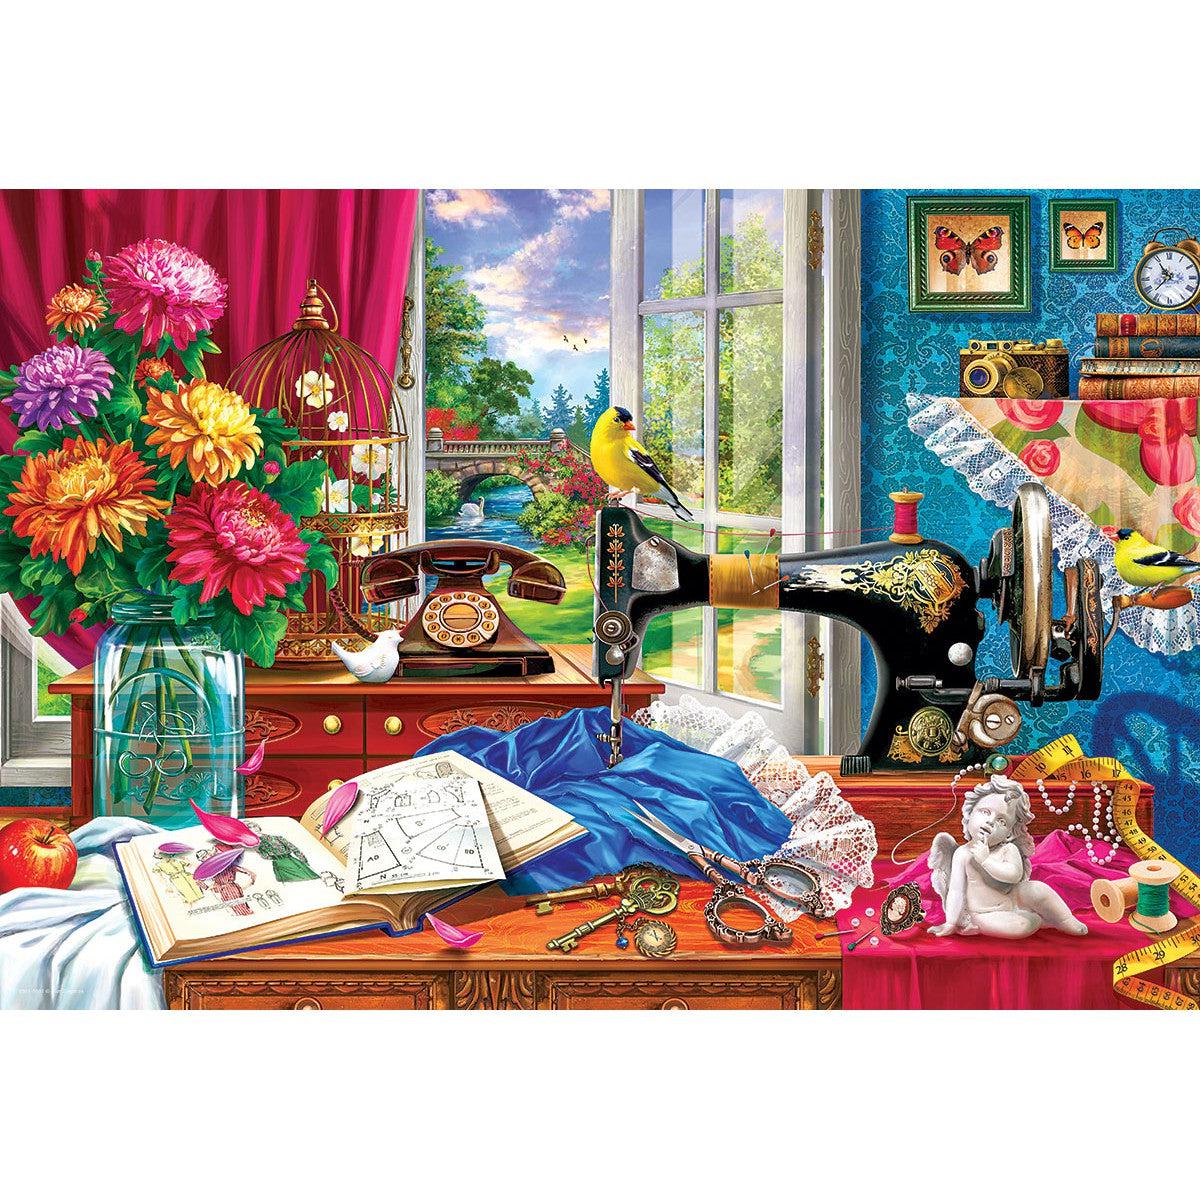 Sewing Memories 550 Piece Jigsaw Puzzle in Tin Eurographics